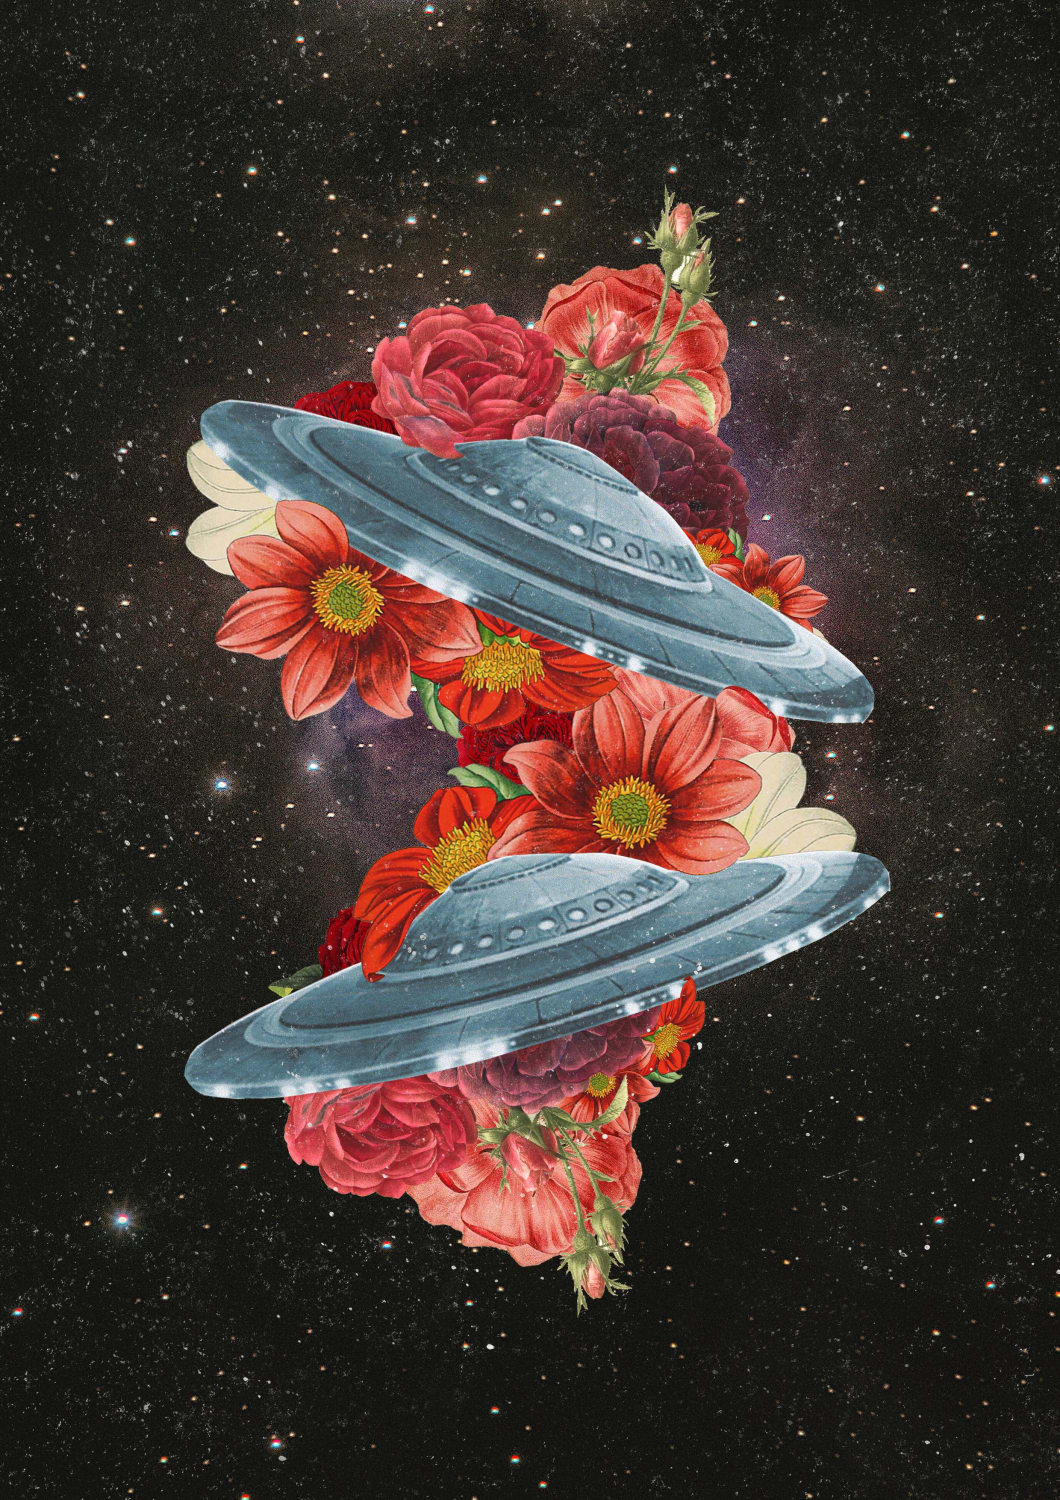 Floral UFO, Me, Mixed Media Collage, 2020.